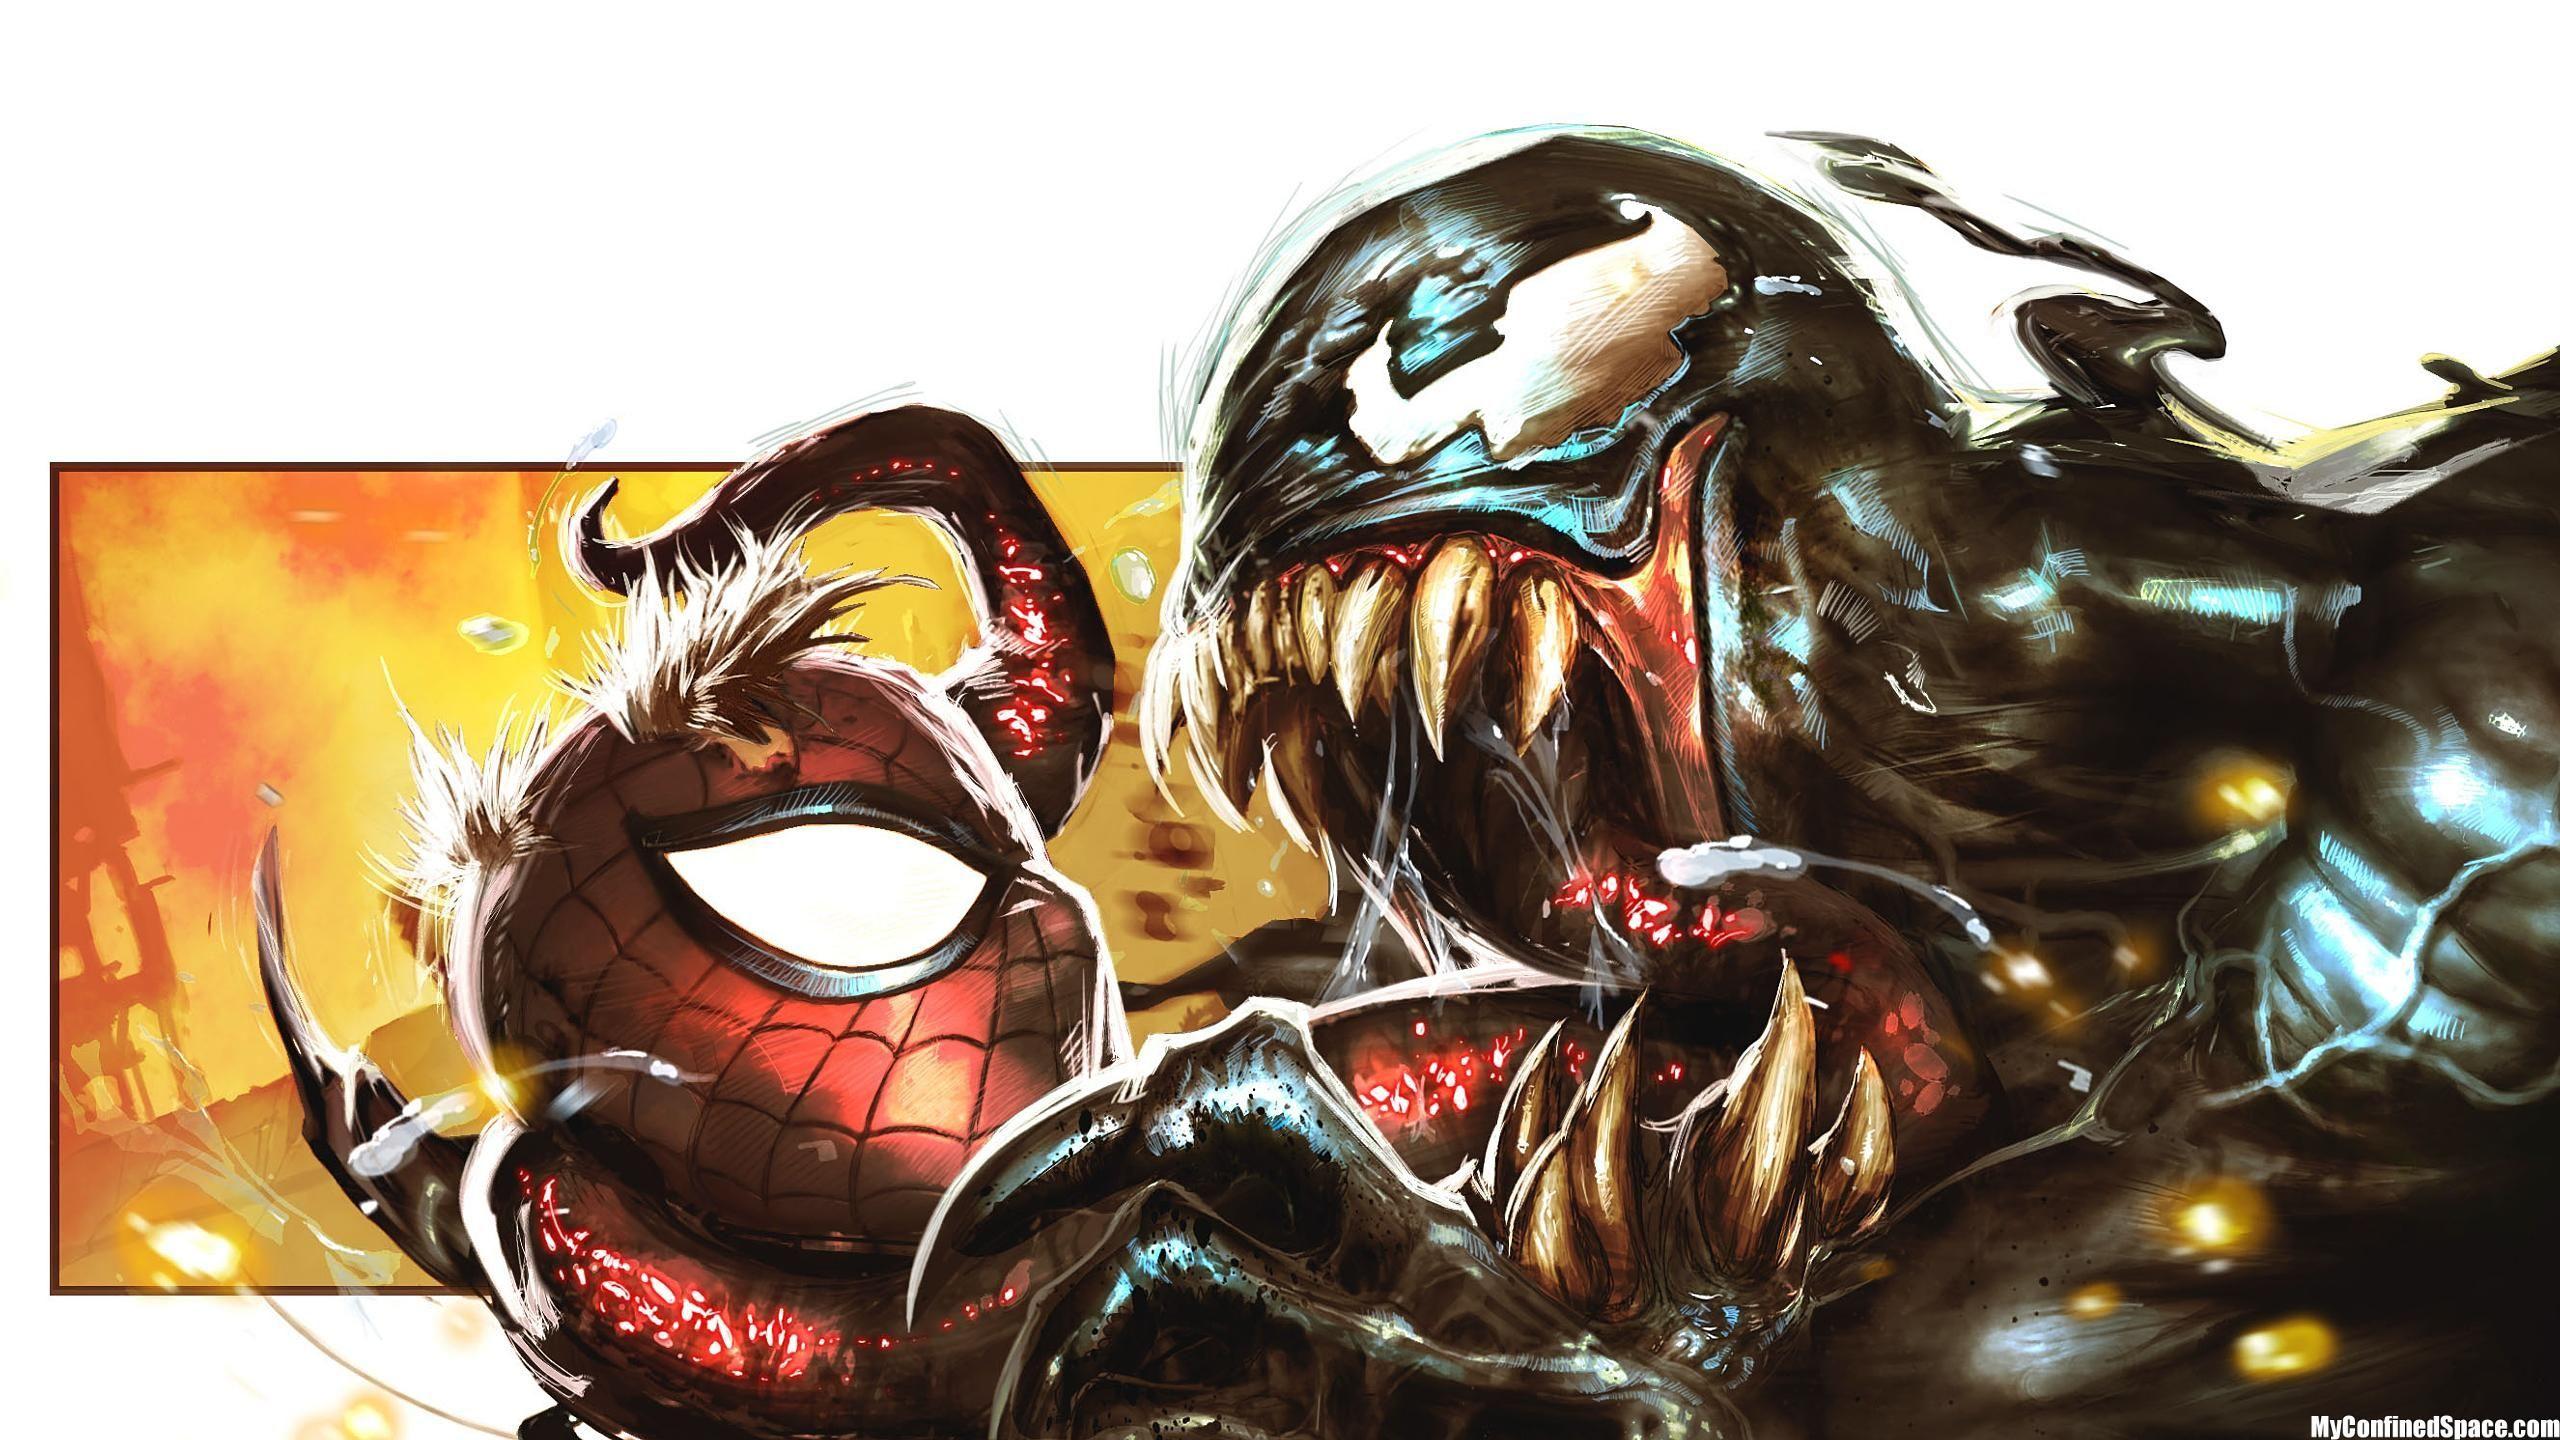 Spider Man Vs Venom Wallpaper Art By: Unknown You Can Never Go Wrong